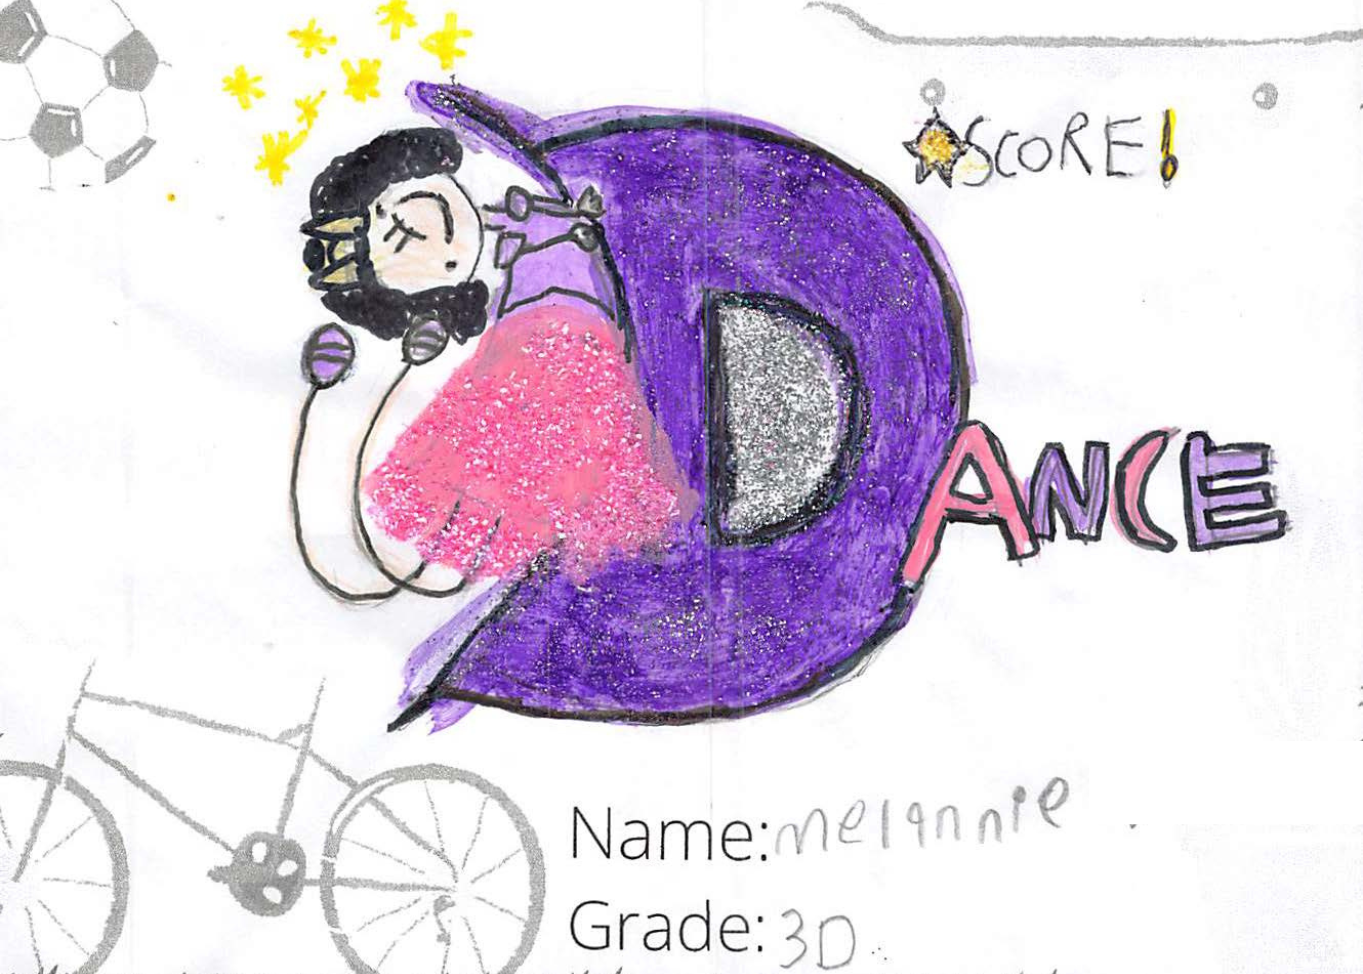 Marker drawing for the SCORE! logo contest. The drawing is pink and purple and includes a girl dancing.